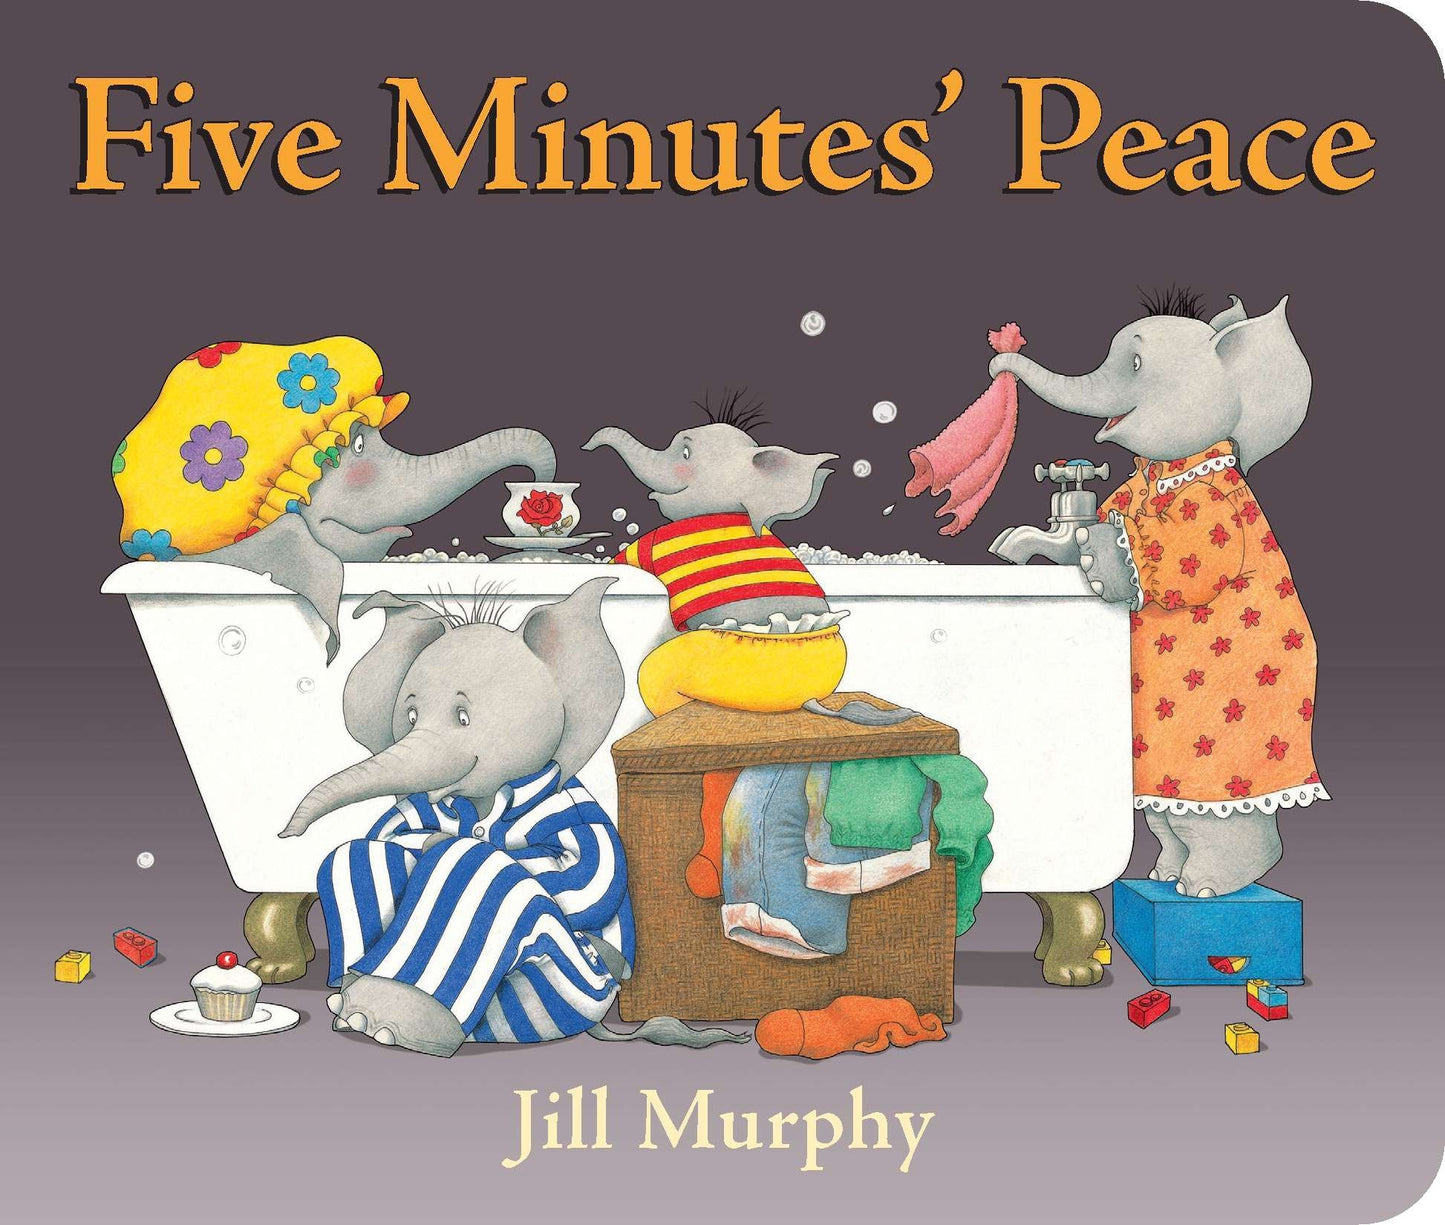 Five Minute’s Peace by Jill Murphy (The Large Family)